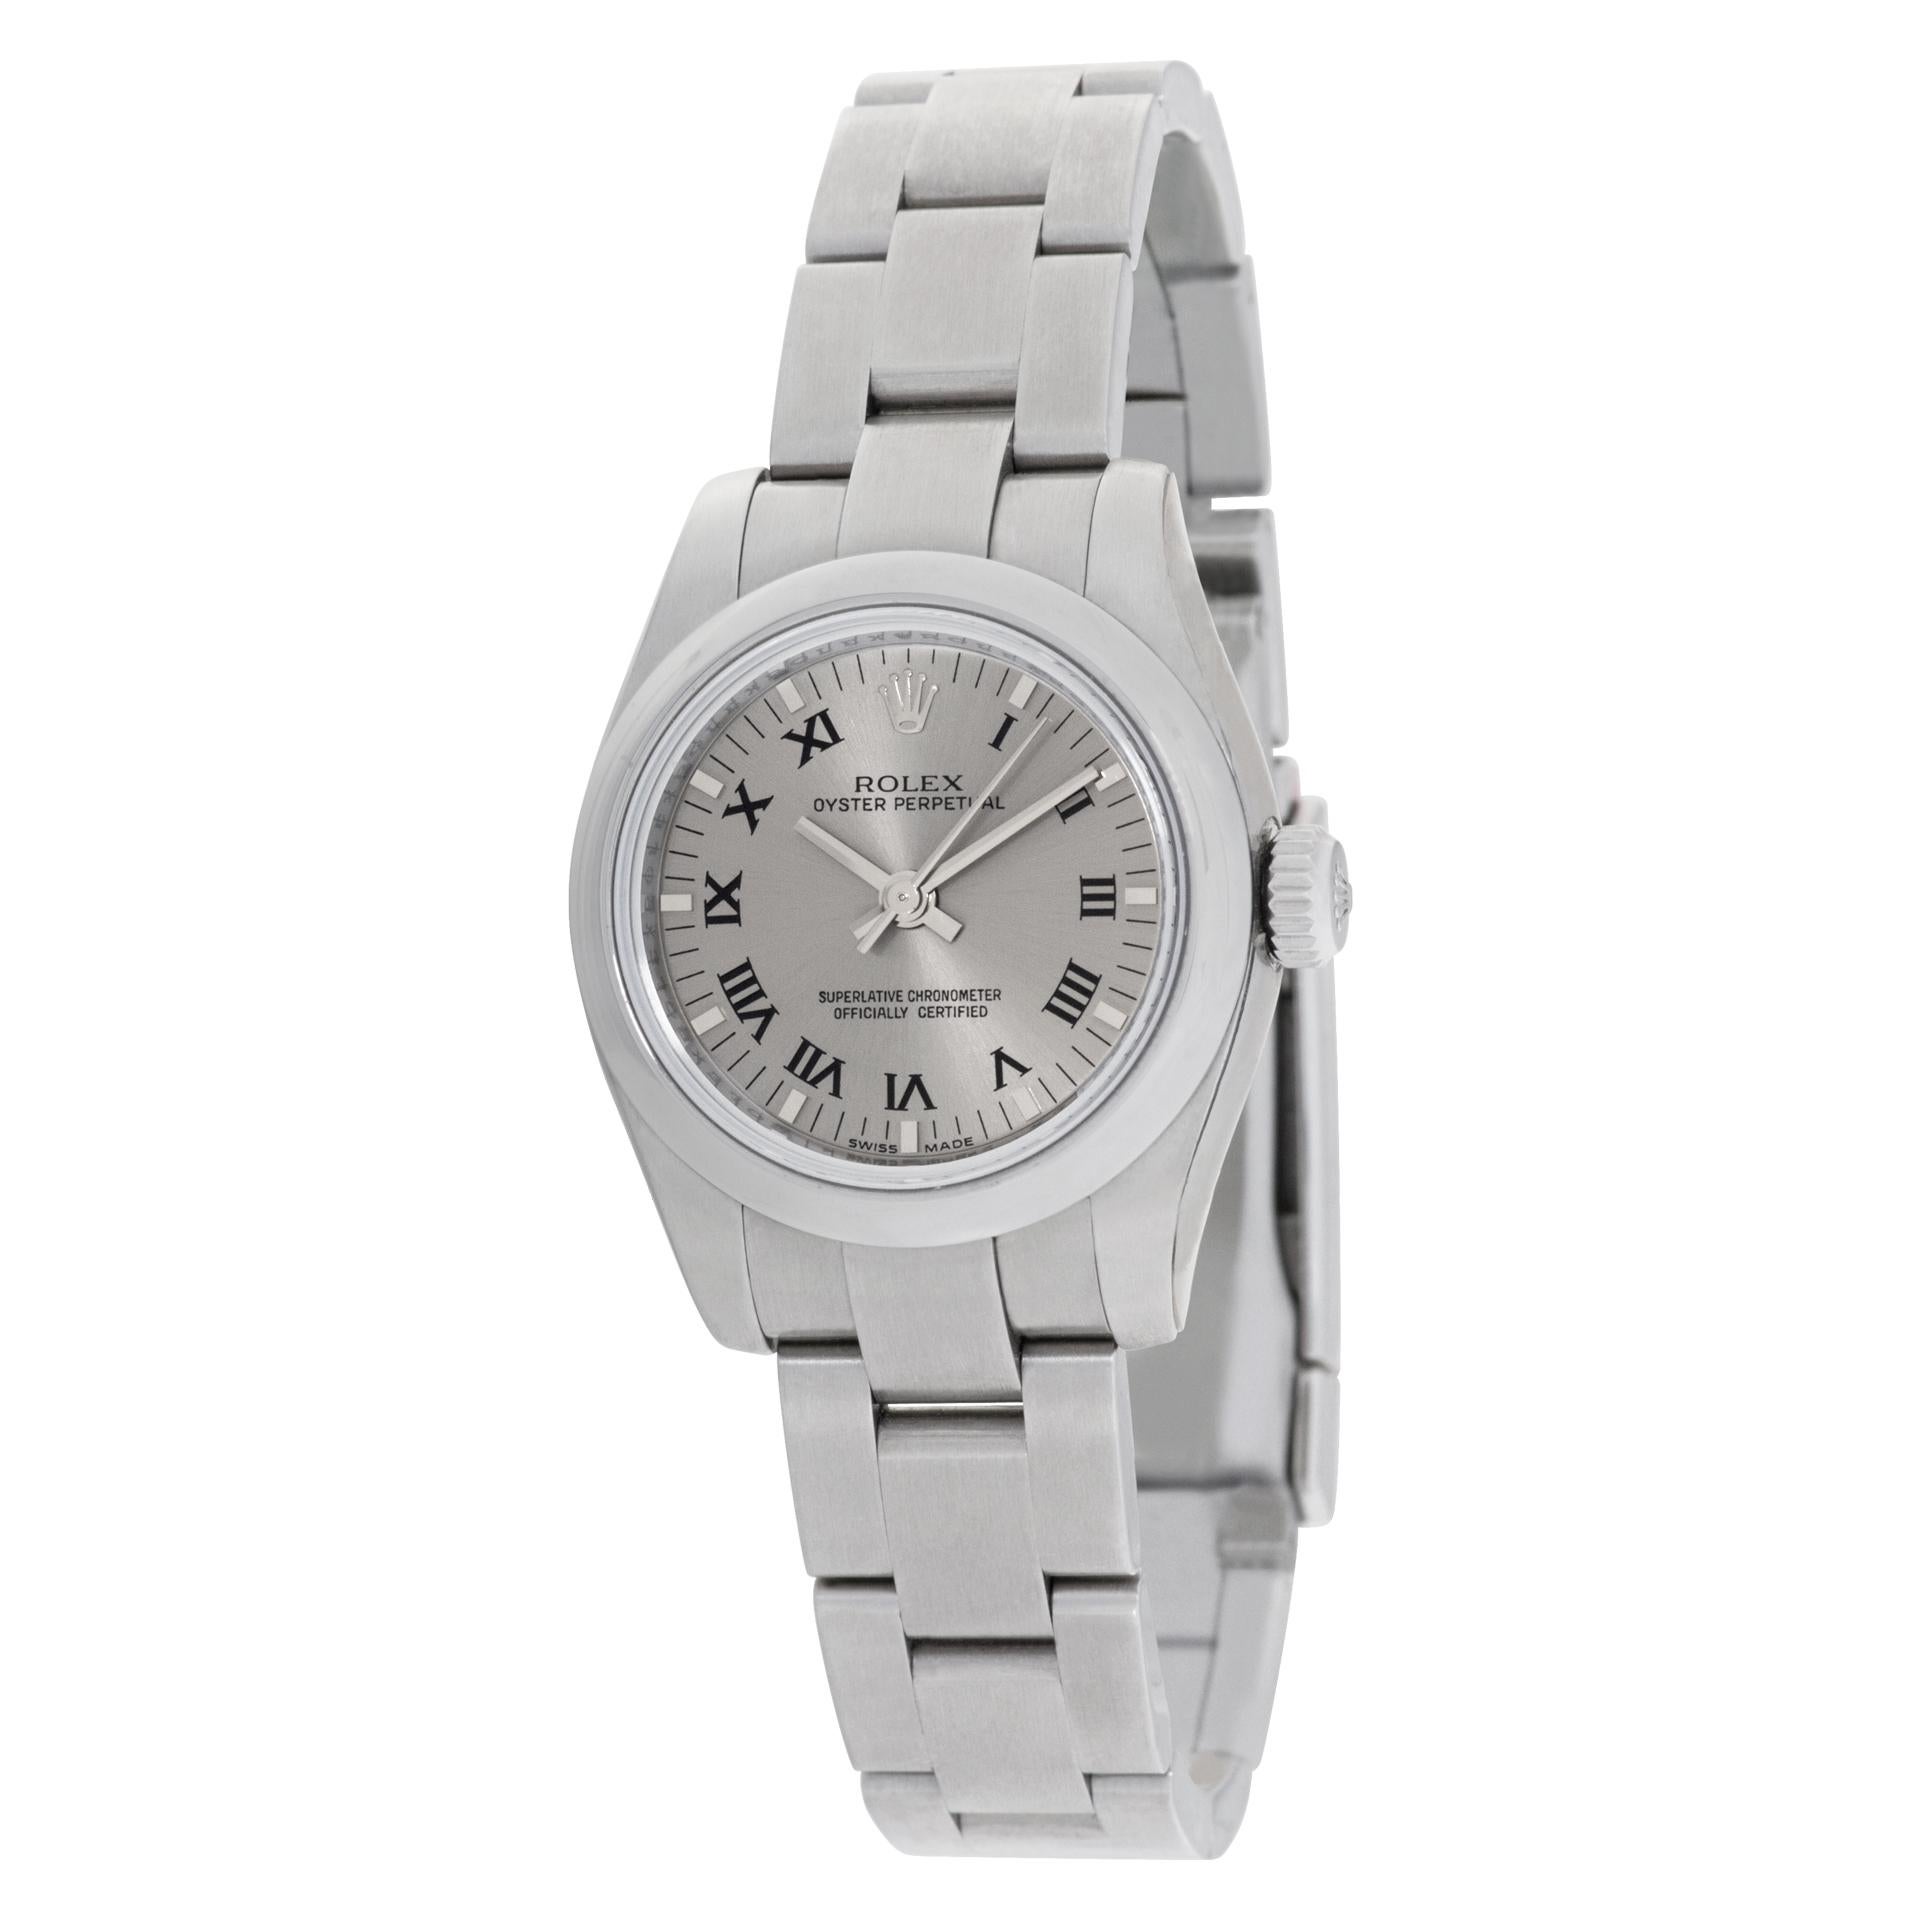 Rolex Oyster Perpetual in stainless steel. Auto w/ sweep seconds. 26 mm case size. Ref 176200. **Bank wire only at this price** Circa 2007. Fine Pre-owned Rolex Watch.   Certified preowned Classic Rolex Oyster Perpetual 176200 watch is made out of